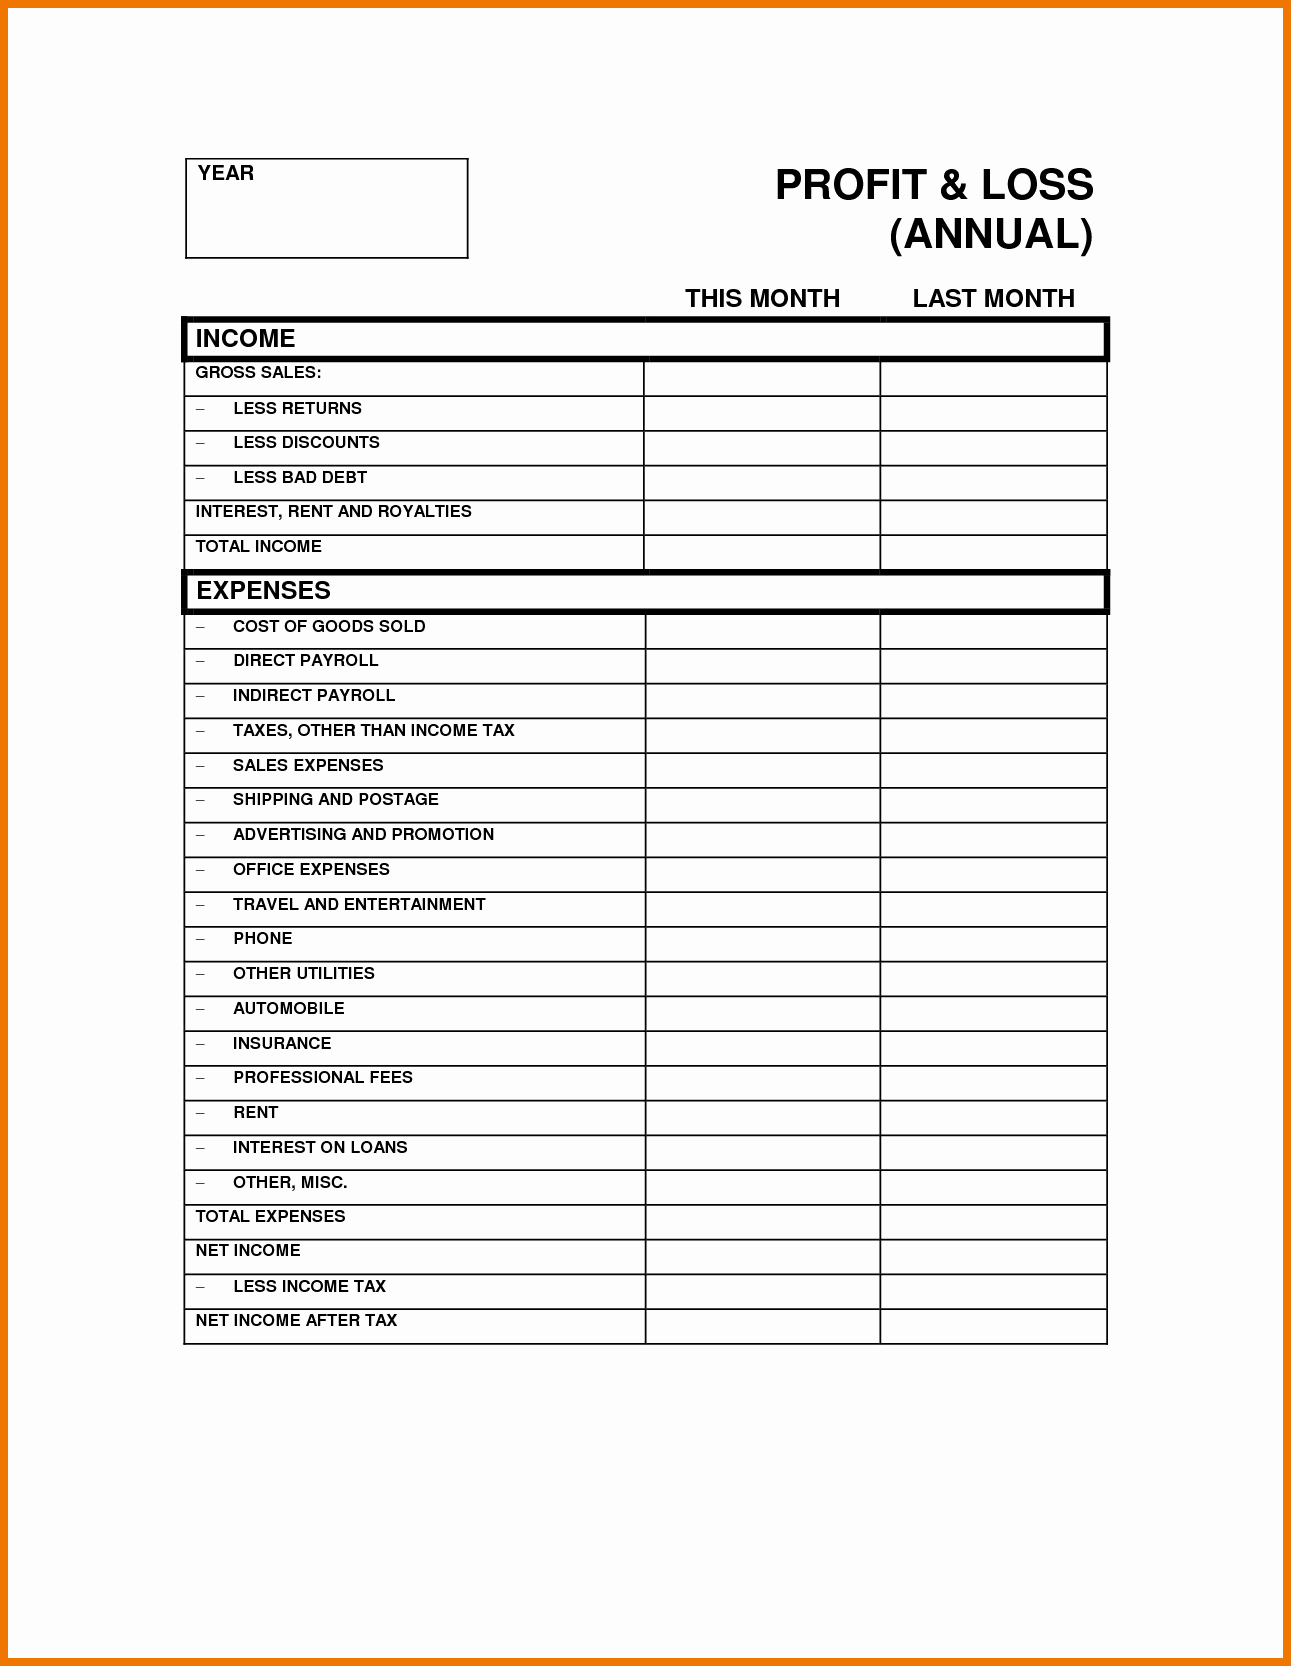 Profit Loss Statement Example Awesome Printable Blank Profit and Loss Statement